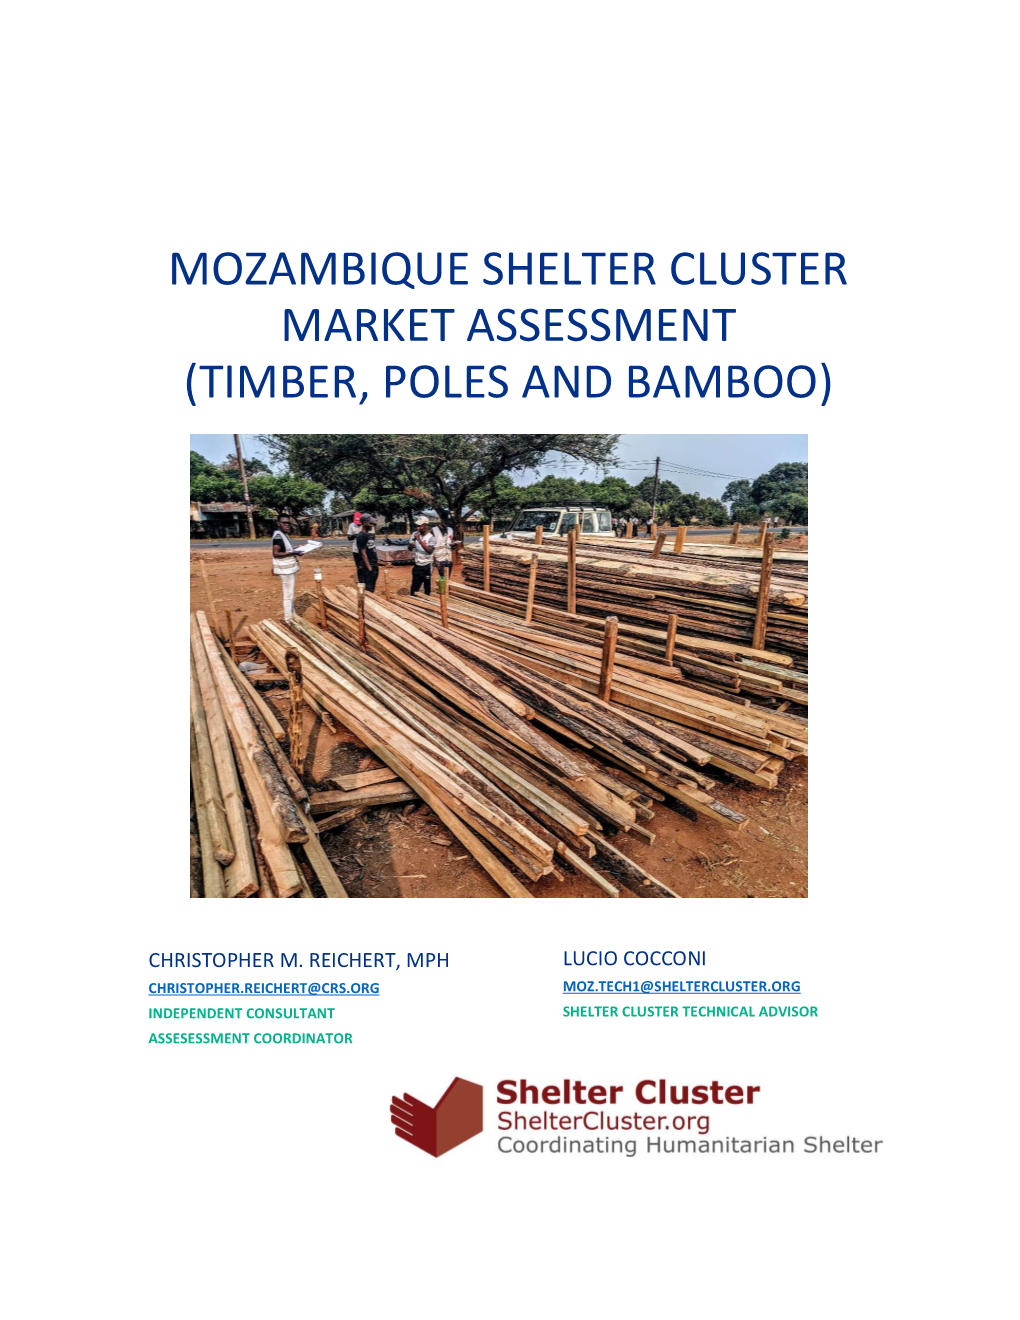 Mozambique Shelter Cluster Market Assessment (Timber, Poles and Bamboo)